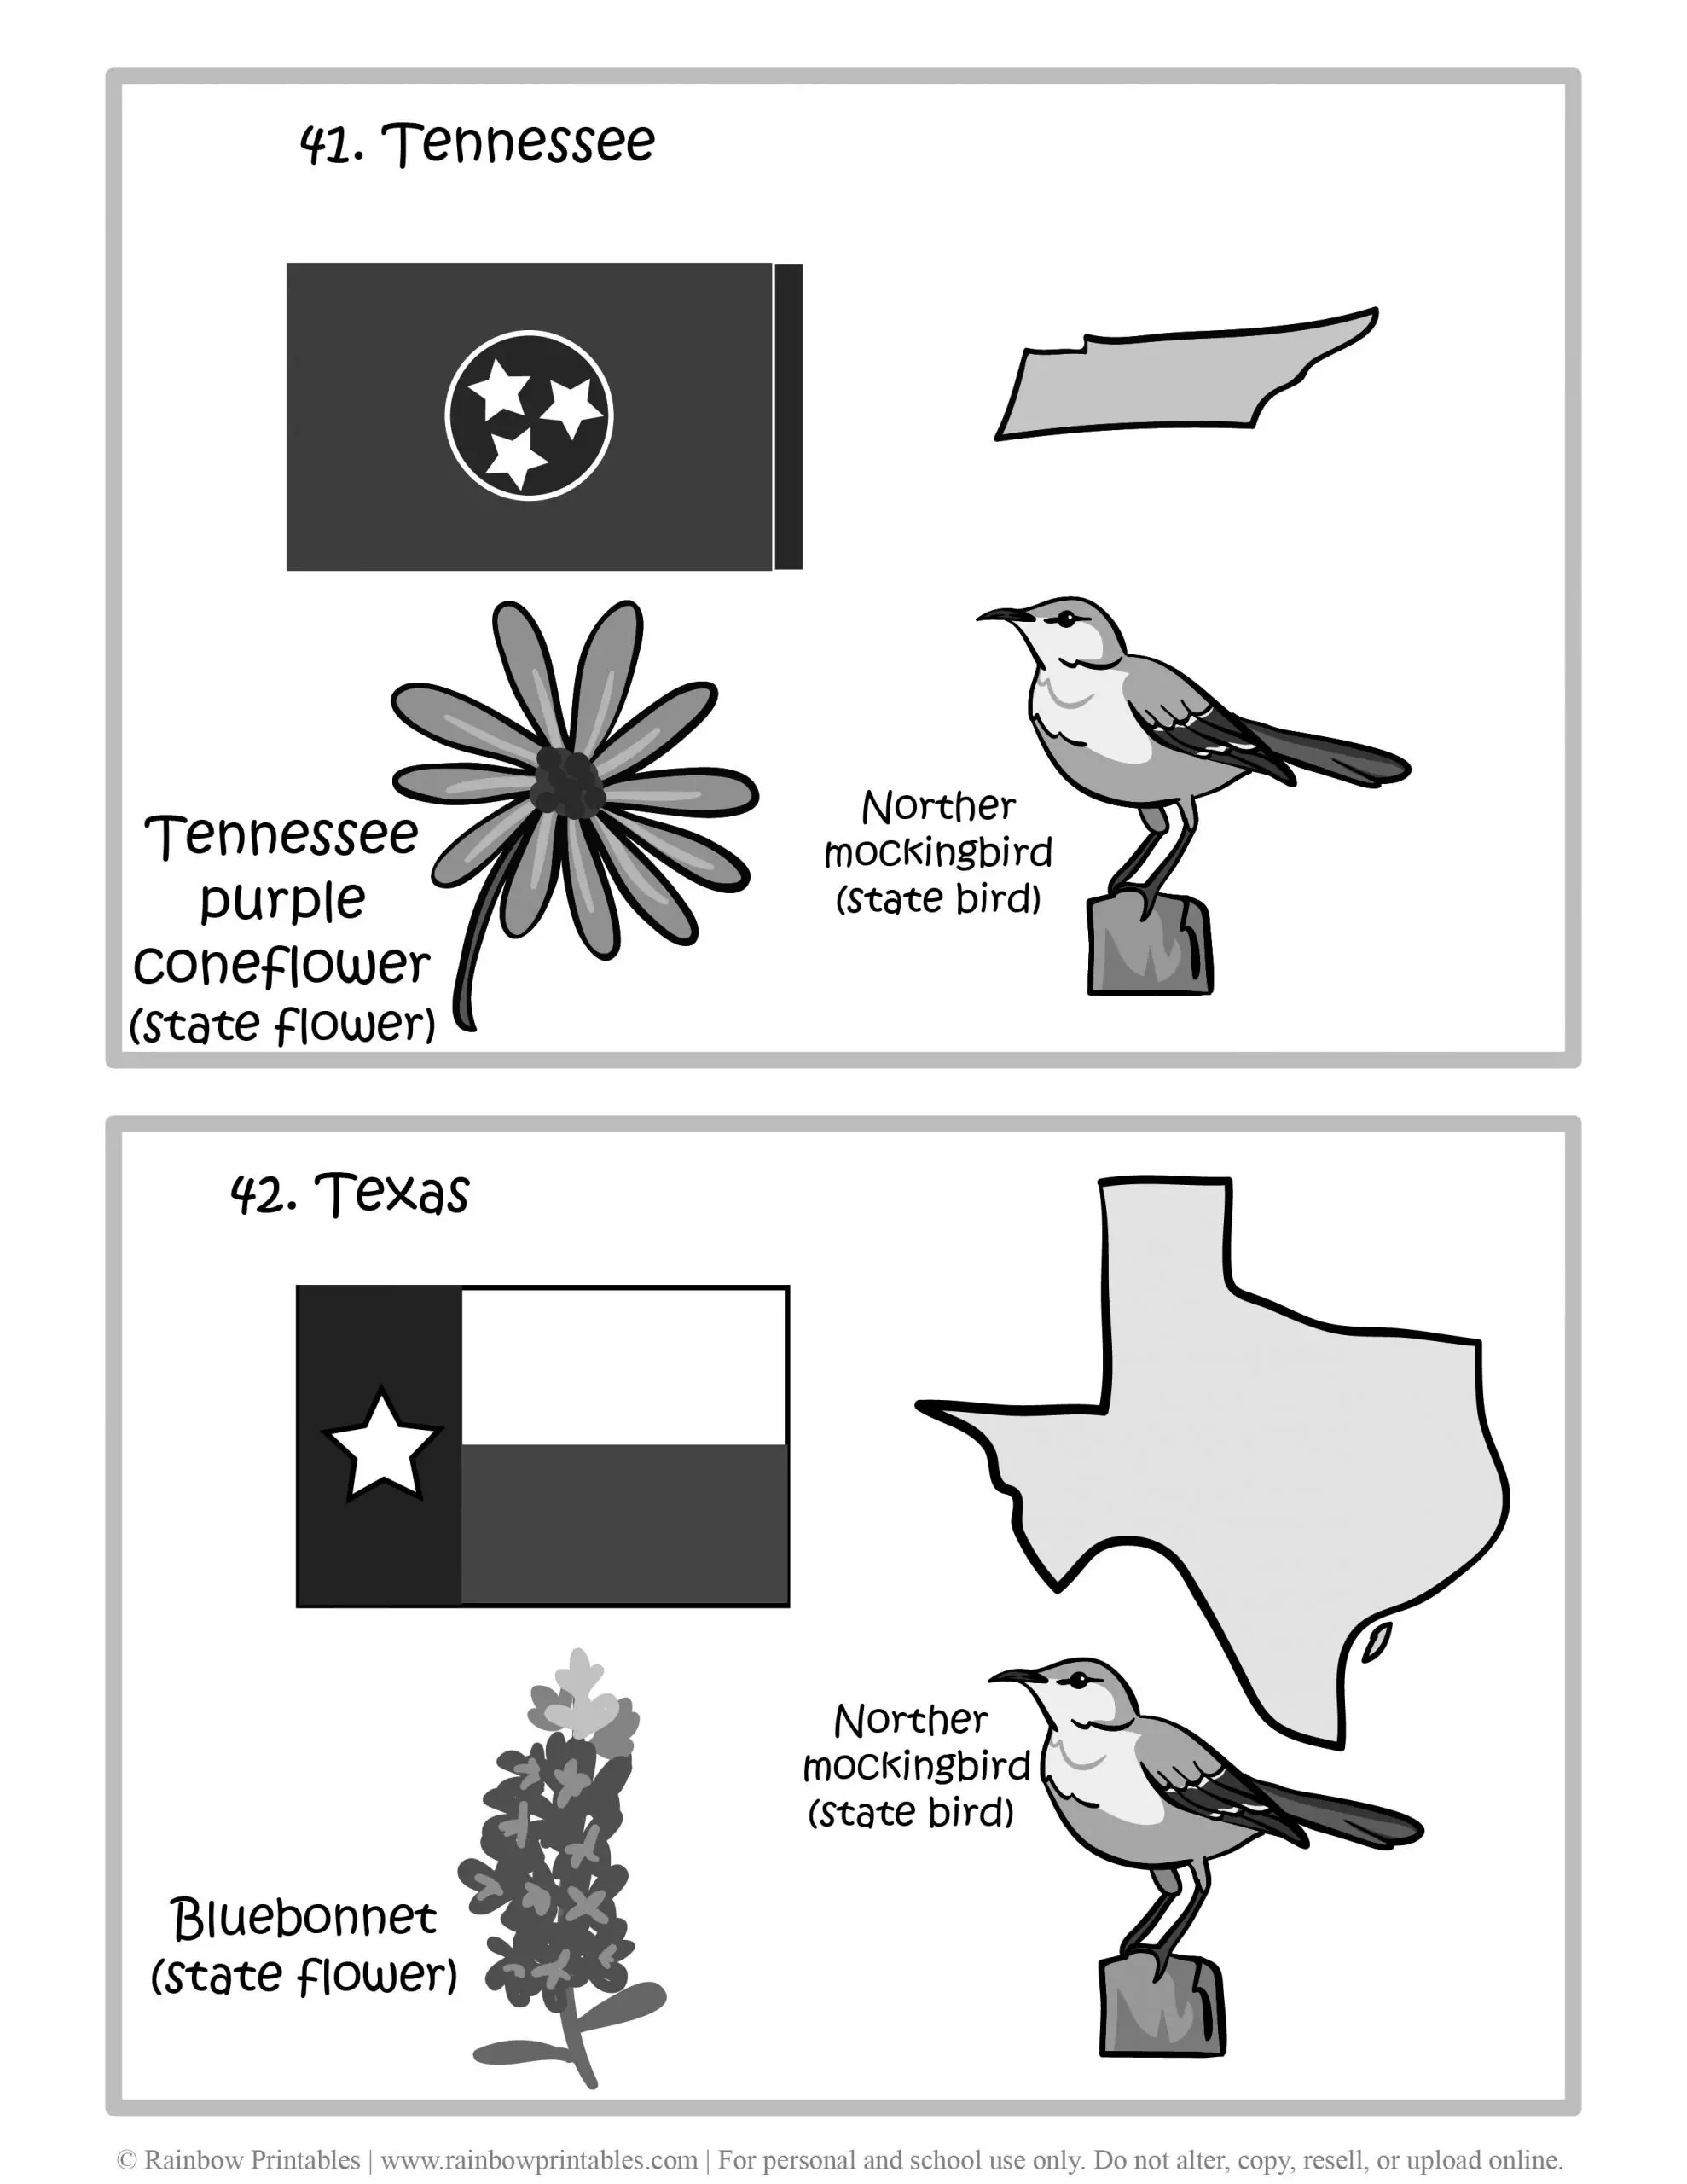 Tennessee, Texas, 50 US State Flag, State Bird, State Flower, United States of America - American States Geography Worksheet Class Lesson Printables Flashcards Black White